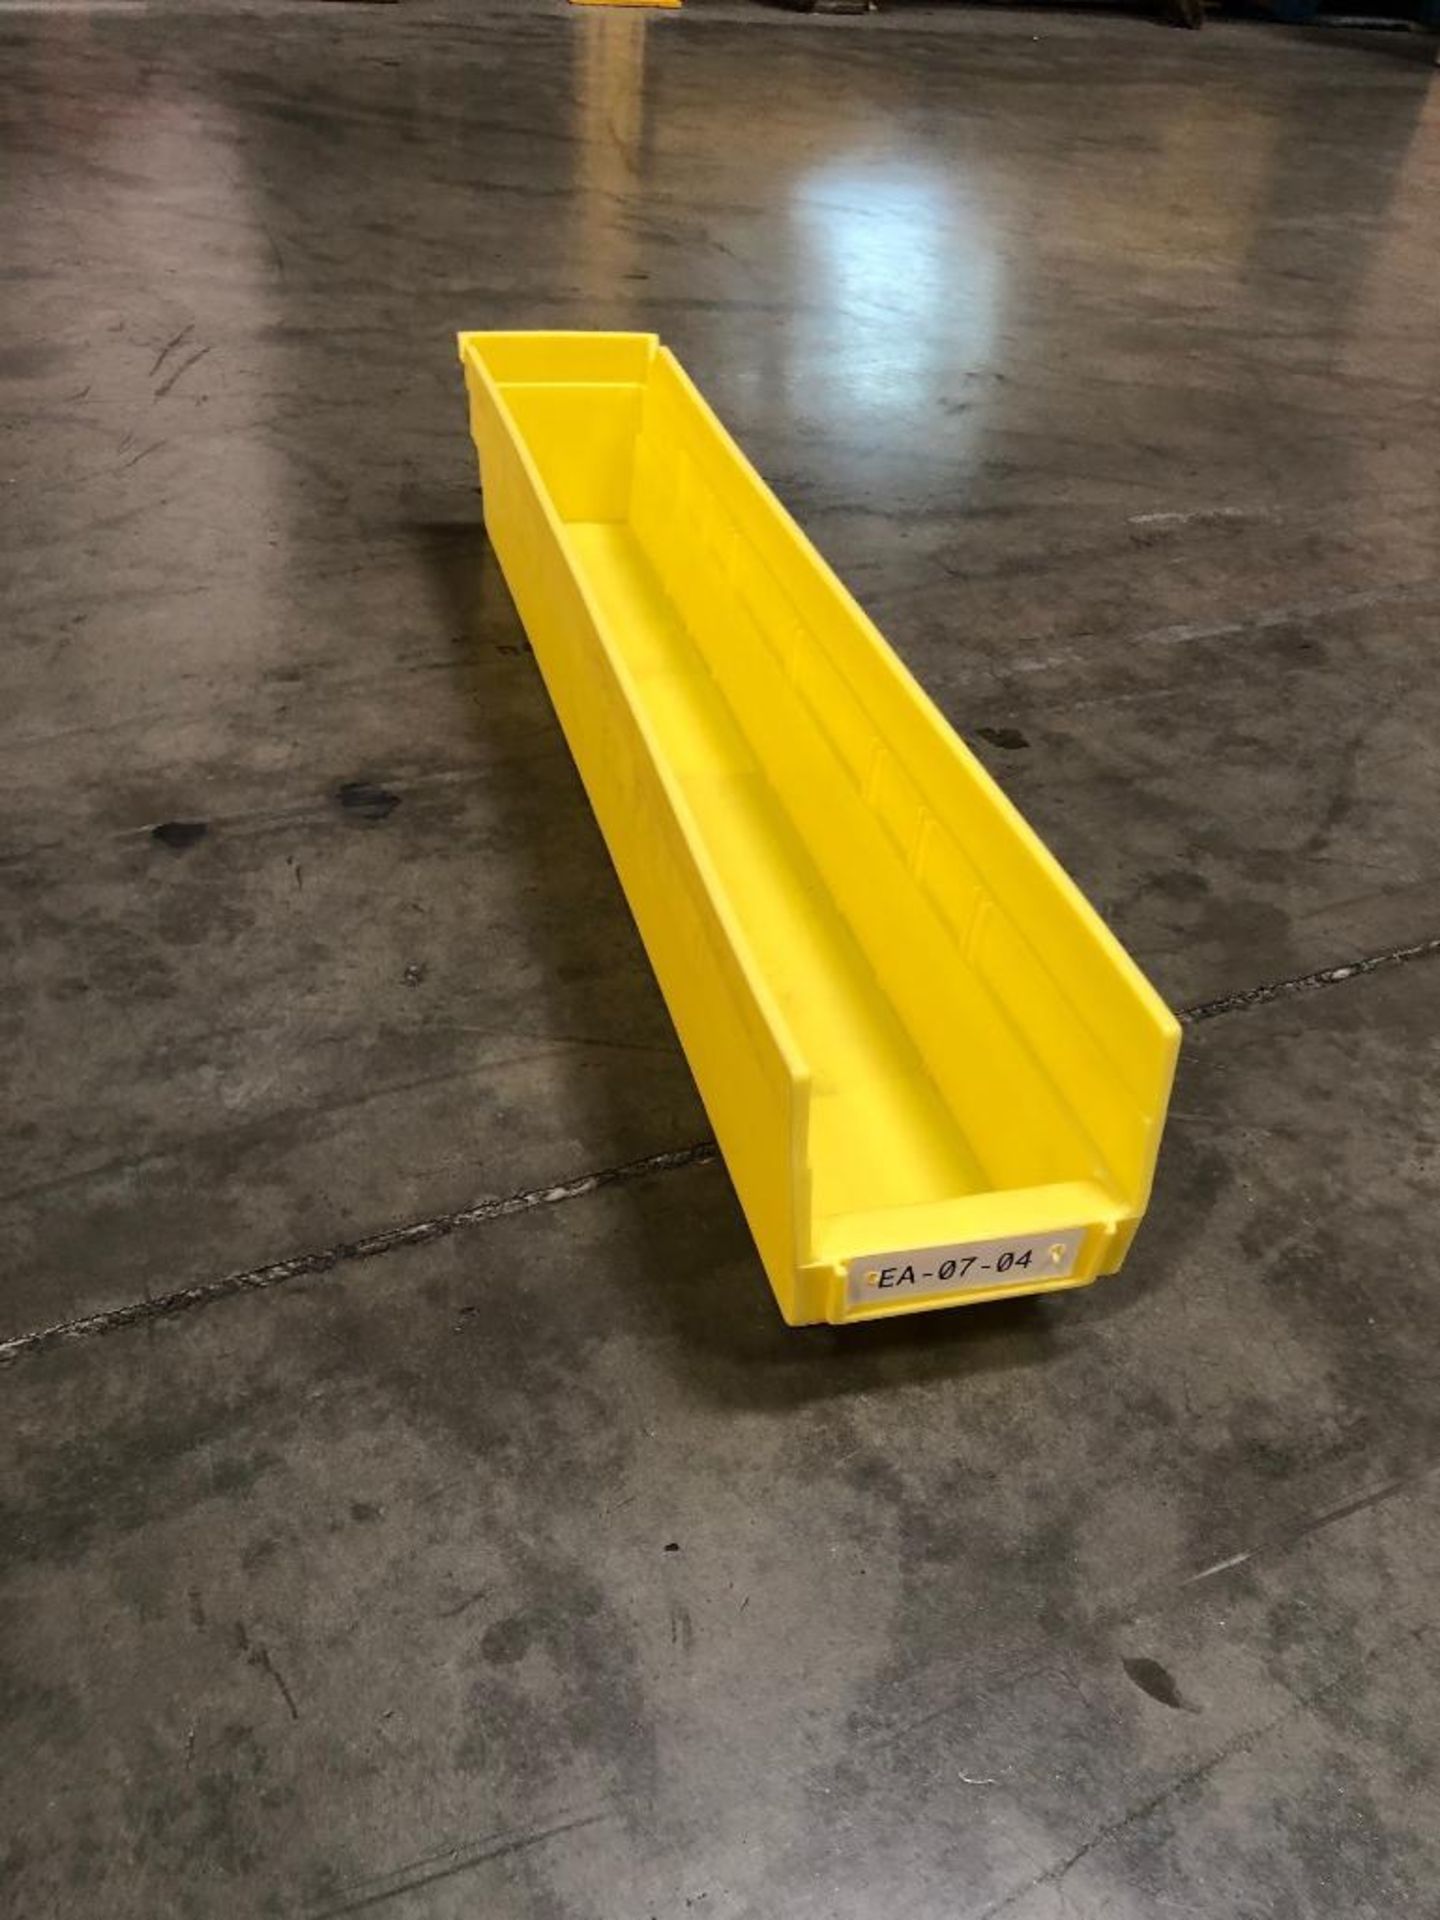 (1,484X) NESTABLE BINS, 23'' L X 4'' W X 4'' H, COLOR: YELLOW, USED, LOCATION: 1850 W. VINEYARD AVE.